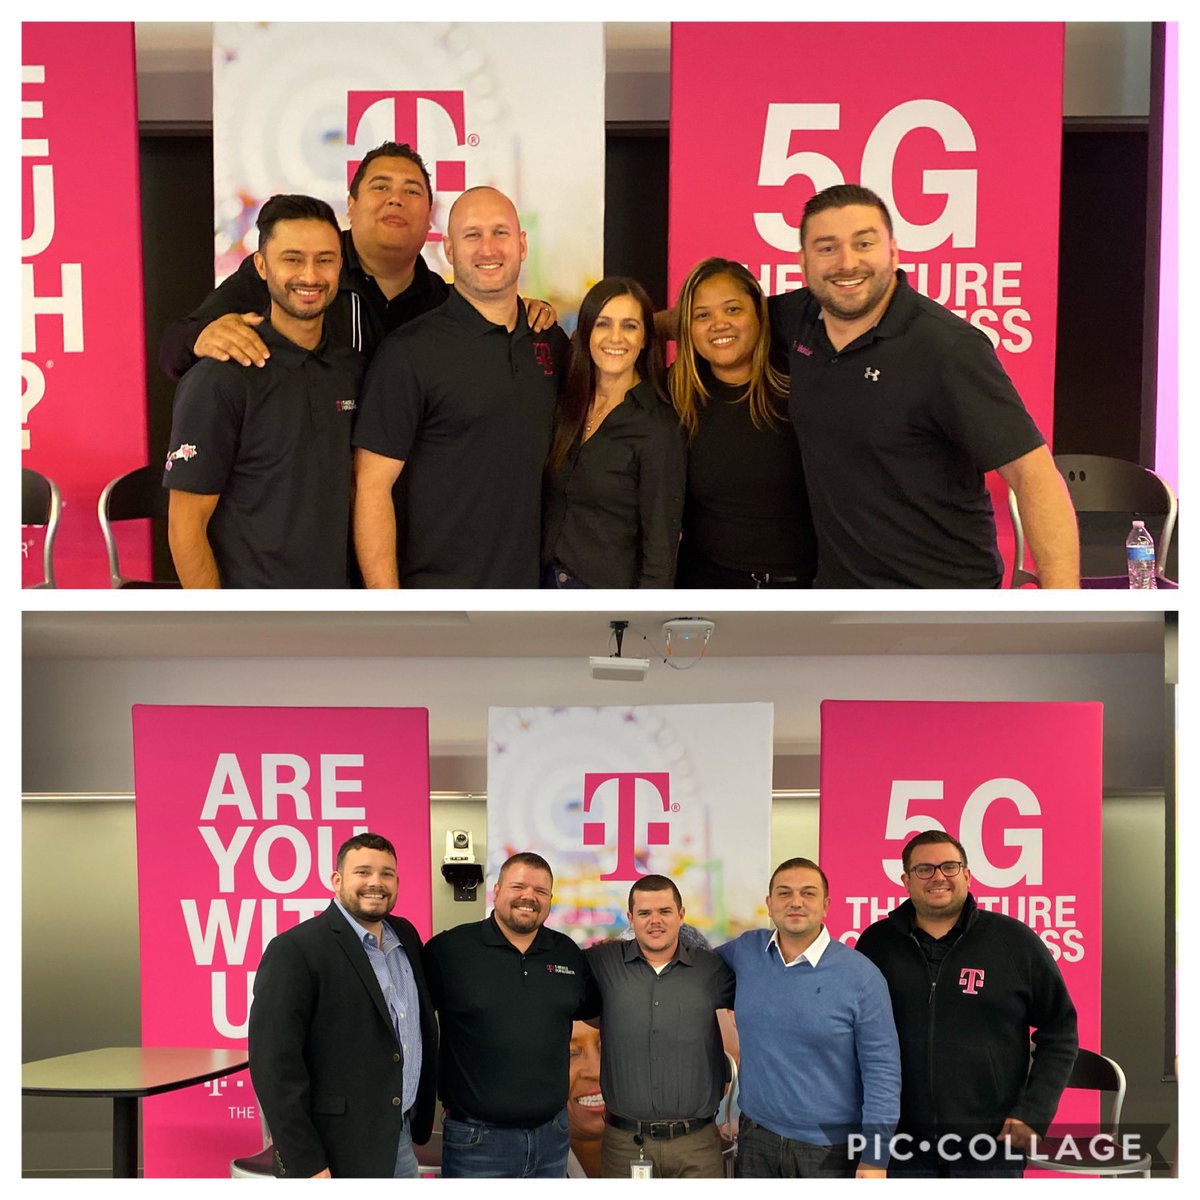 And that’s a wrap on the #NXTLVL and #LDP programs! Proud of all these Regional Sales leaders & future leaders right here!  #FutureIsBright for @TMobileBusiness 
@JakeSalata @DanielleOubre20 @LLaPresta @jasongrutzius @kirby3james